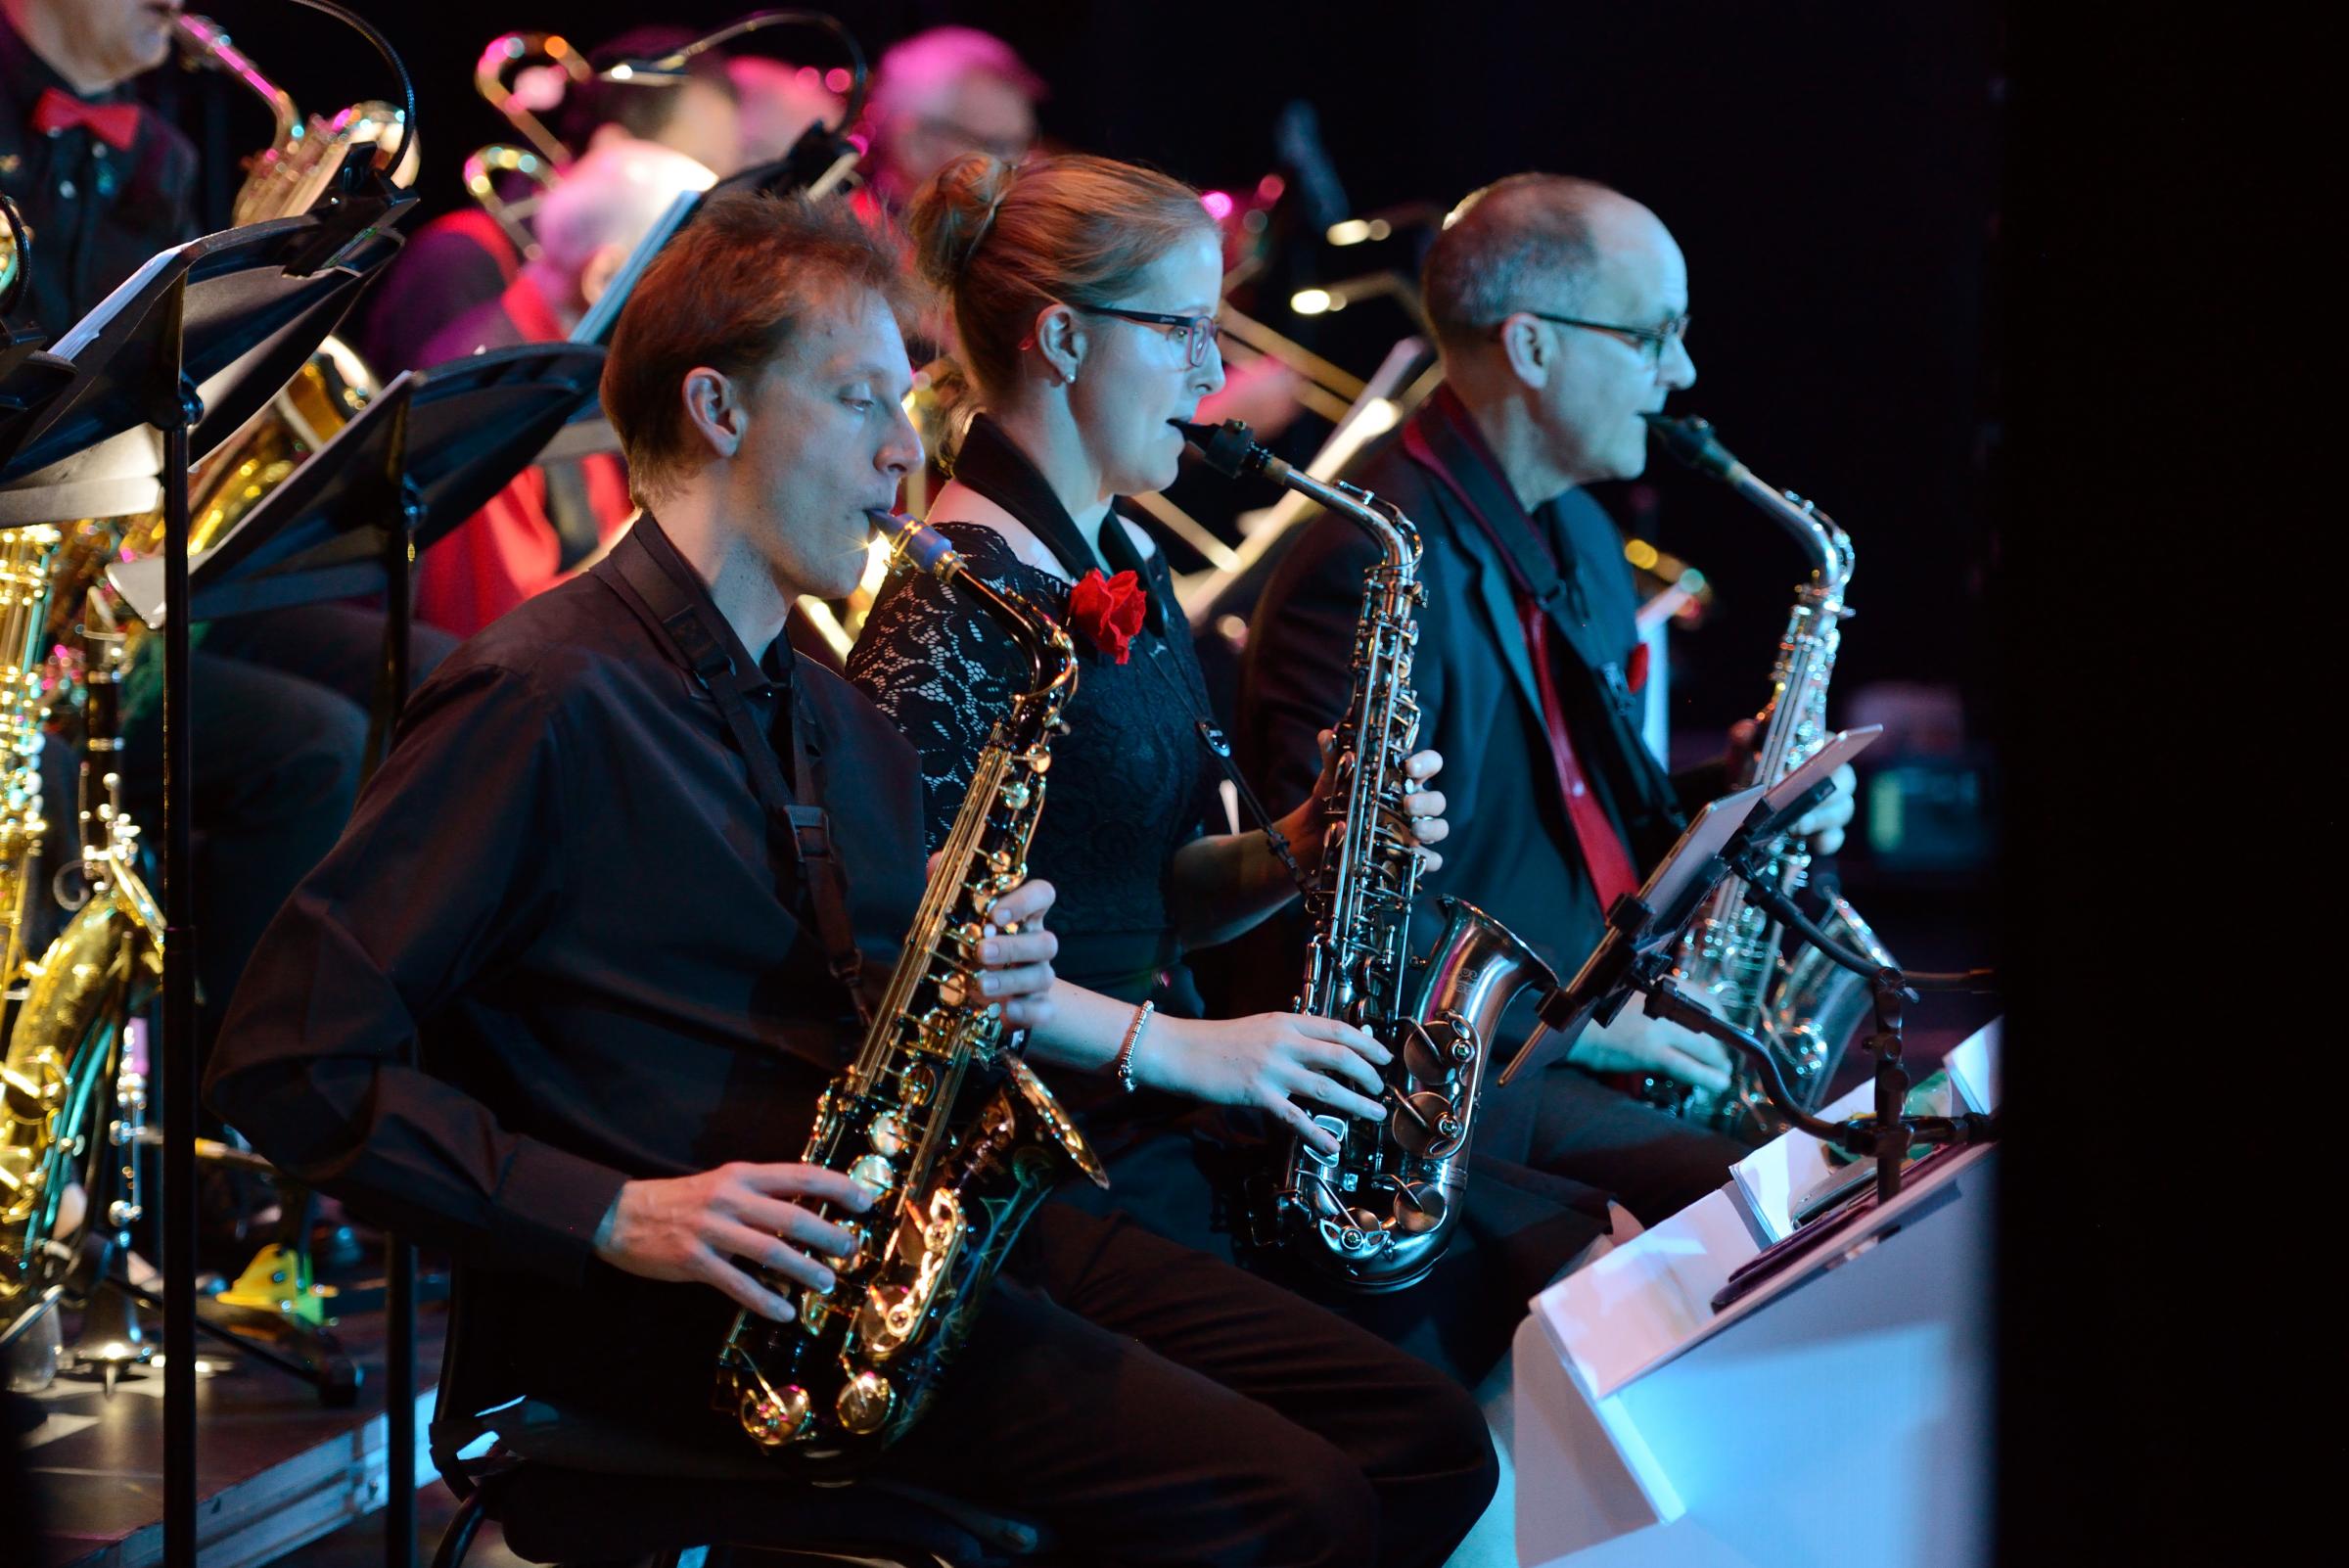 Big band show is a blast for Esher hospice